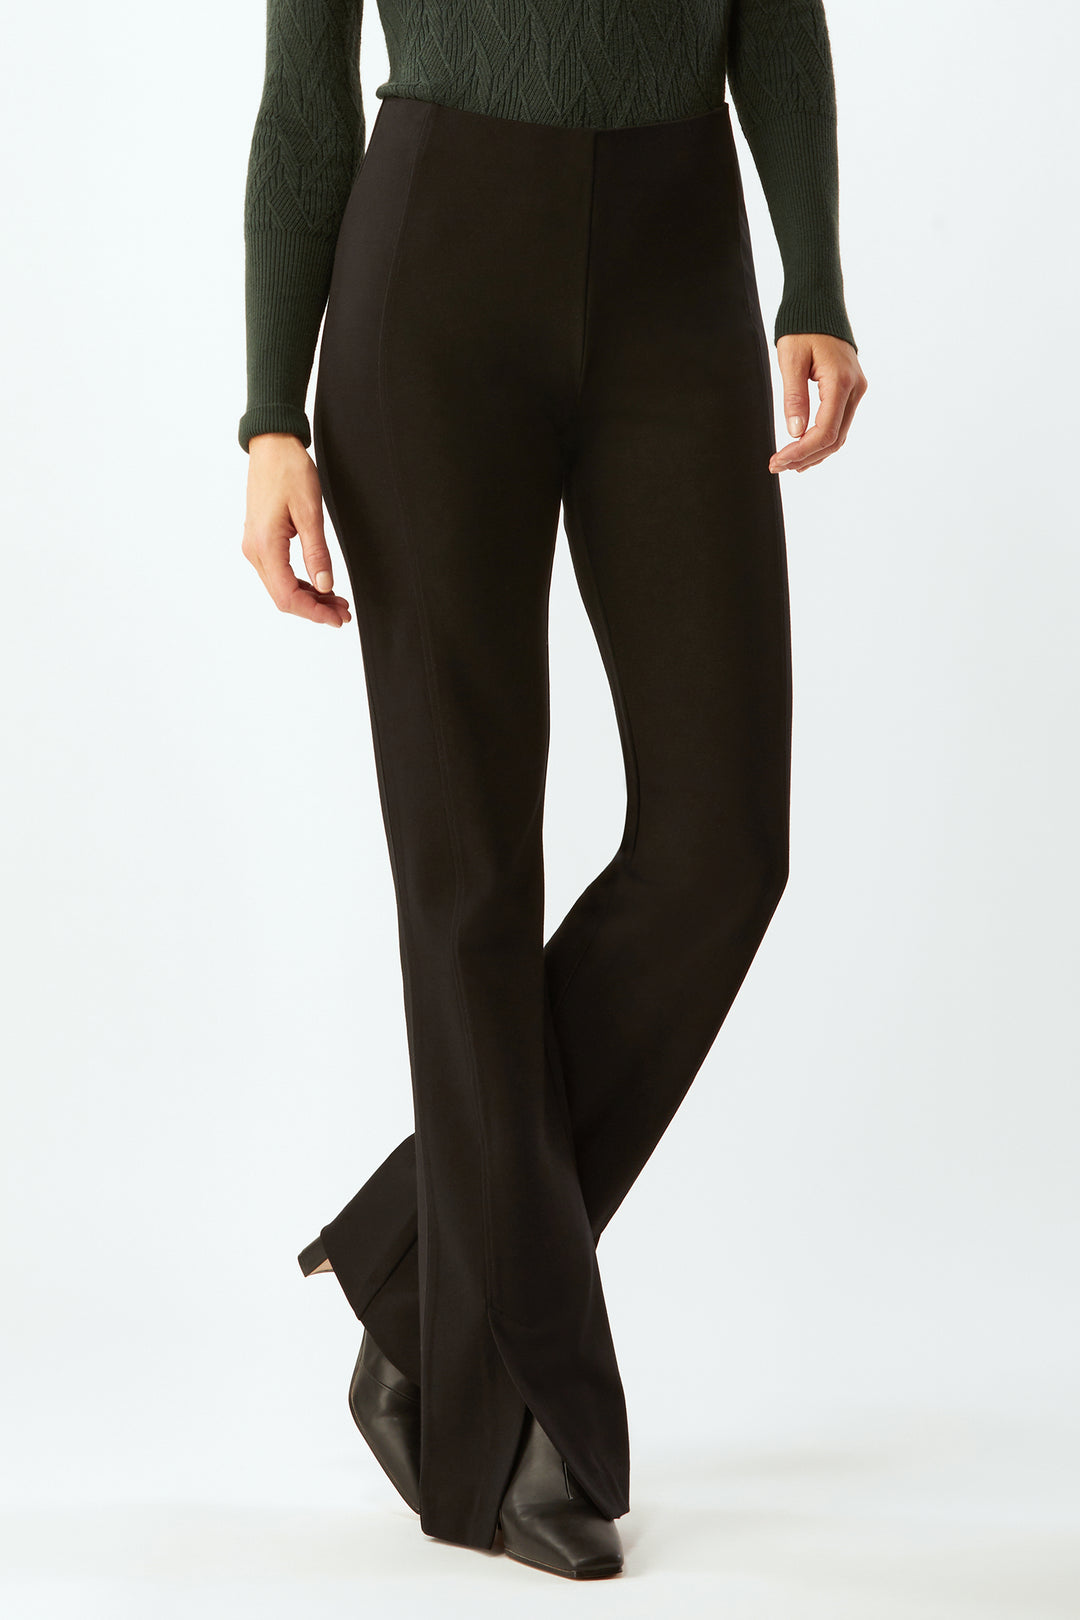 HIGH WAISTED BOOT-CUT TROUSERS, Black